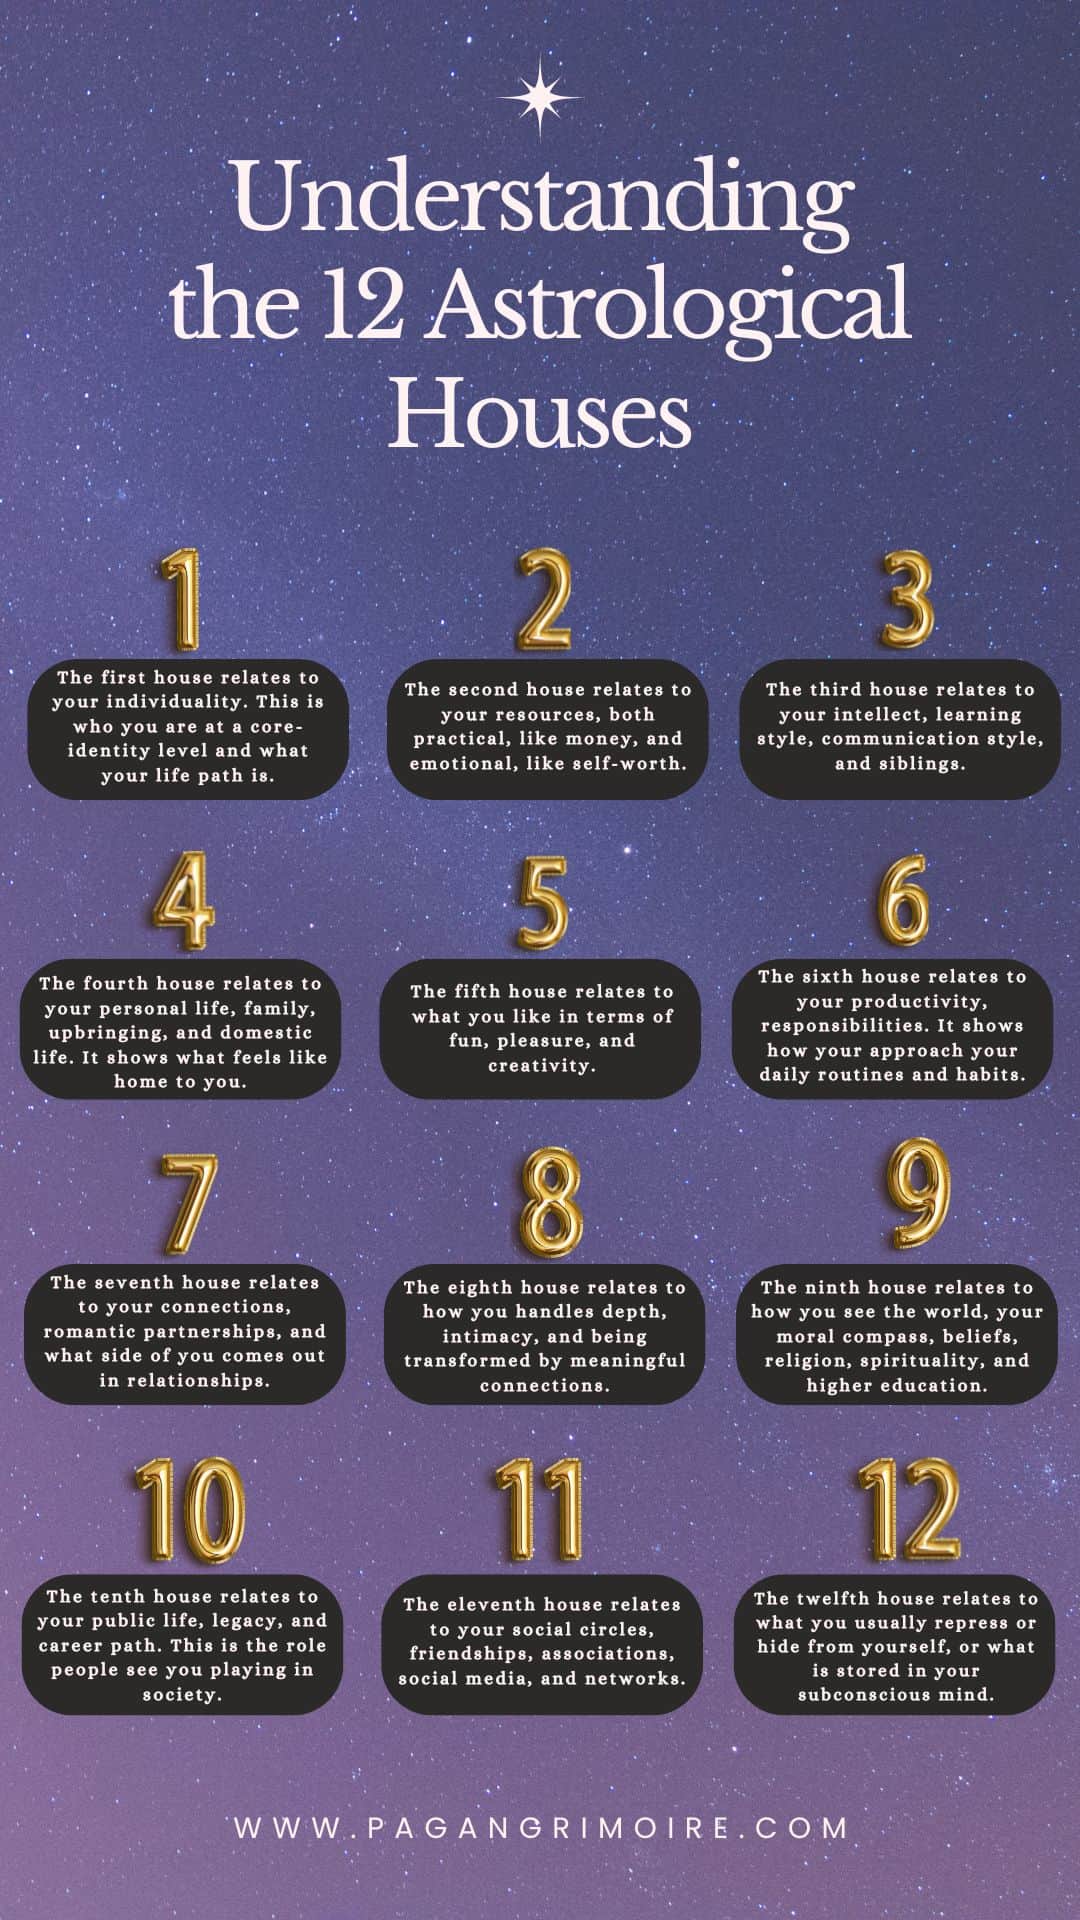 How to Understand the 12 Astrological Houses in Your Birth Chart